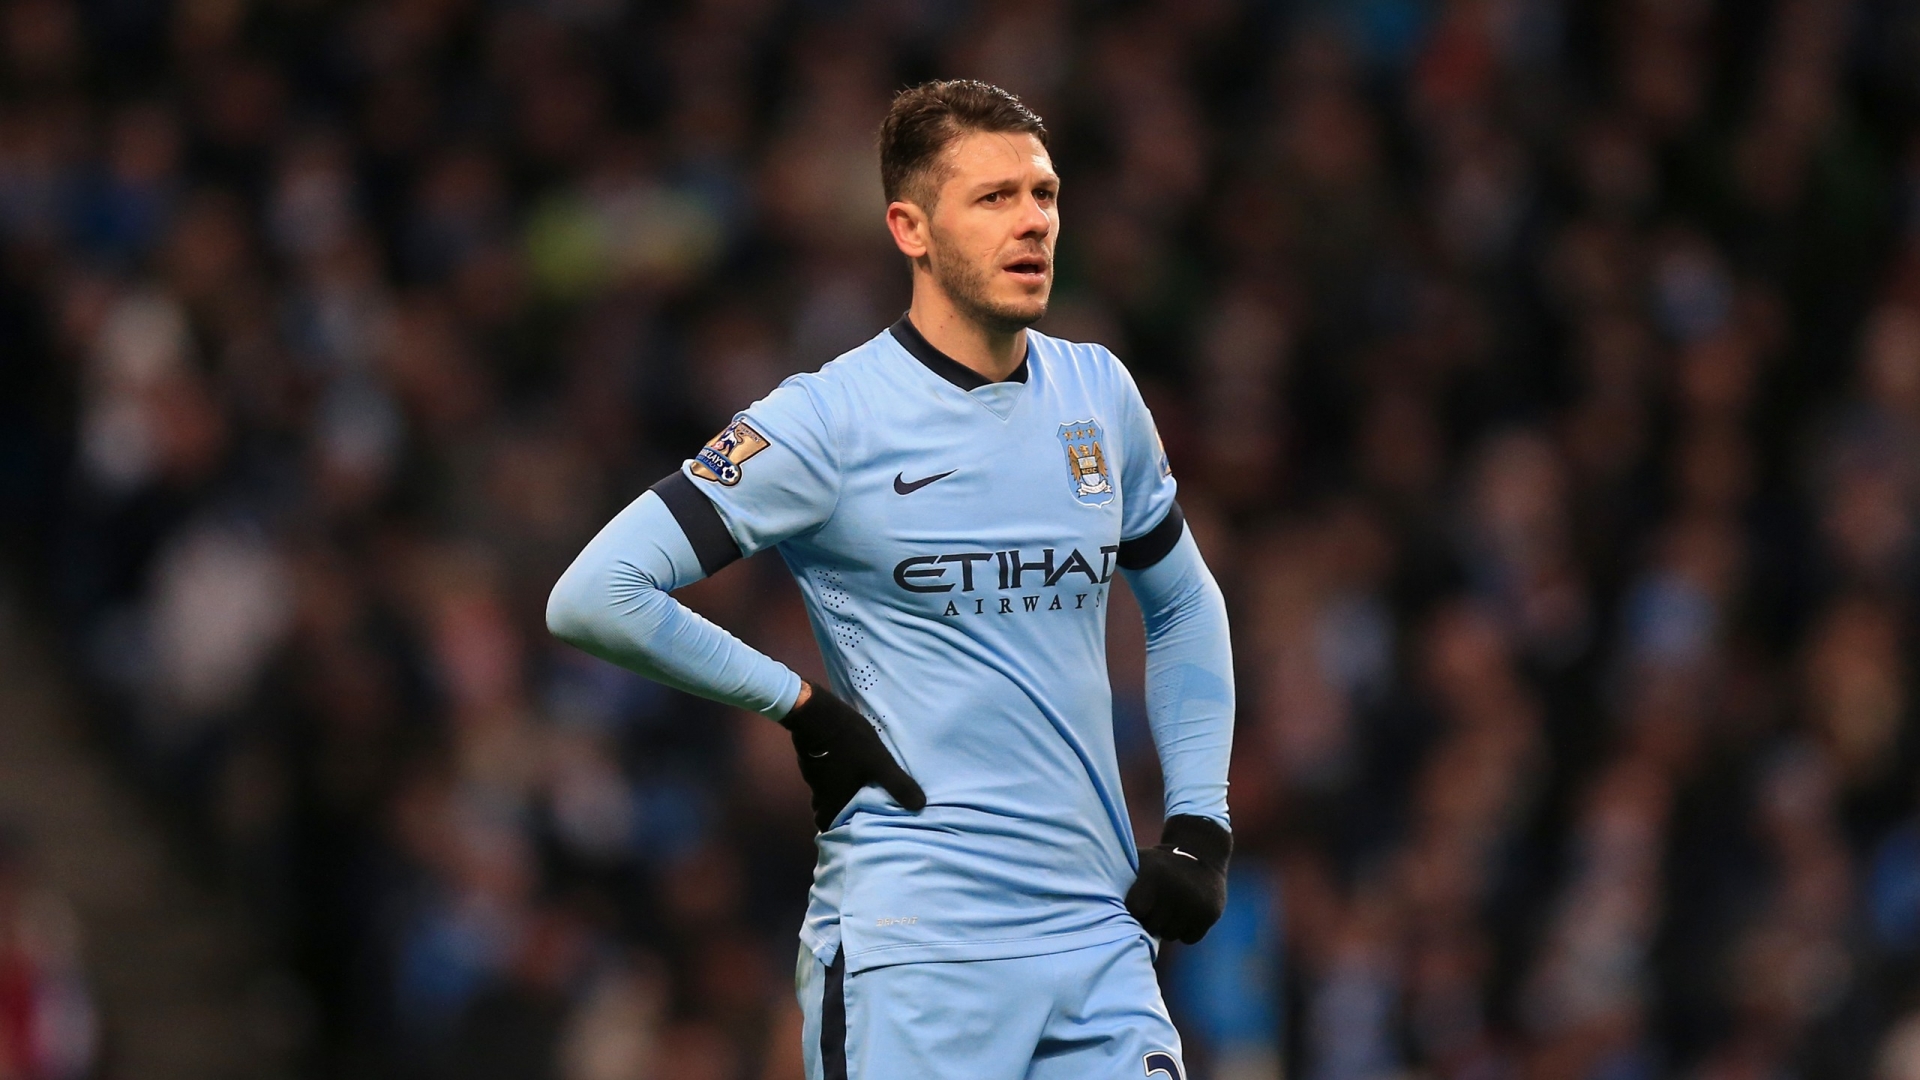 Martin Demichelis Football Player for 1920 x 1080 HDTV 1080p resolution